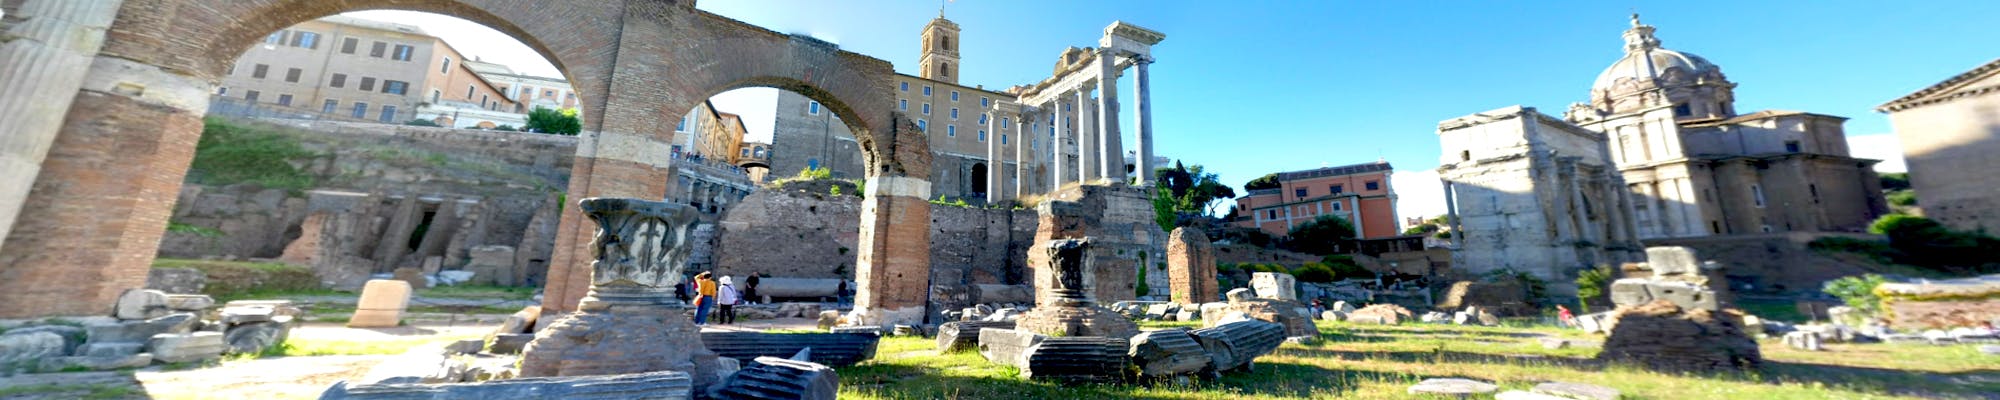 Virtual tour of the Roman Forum from home Musement